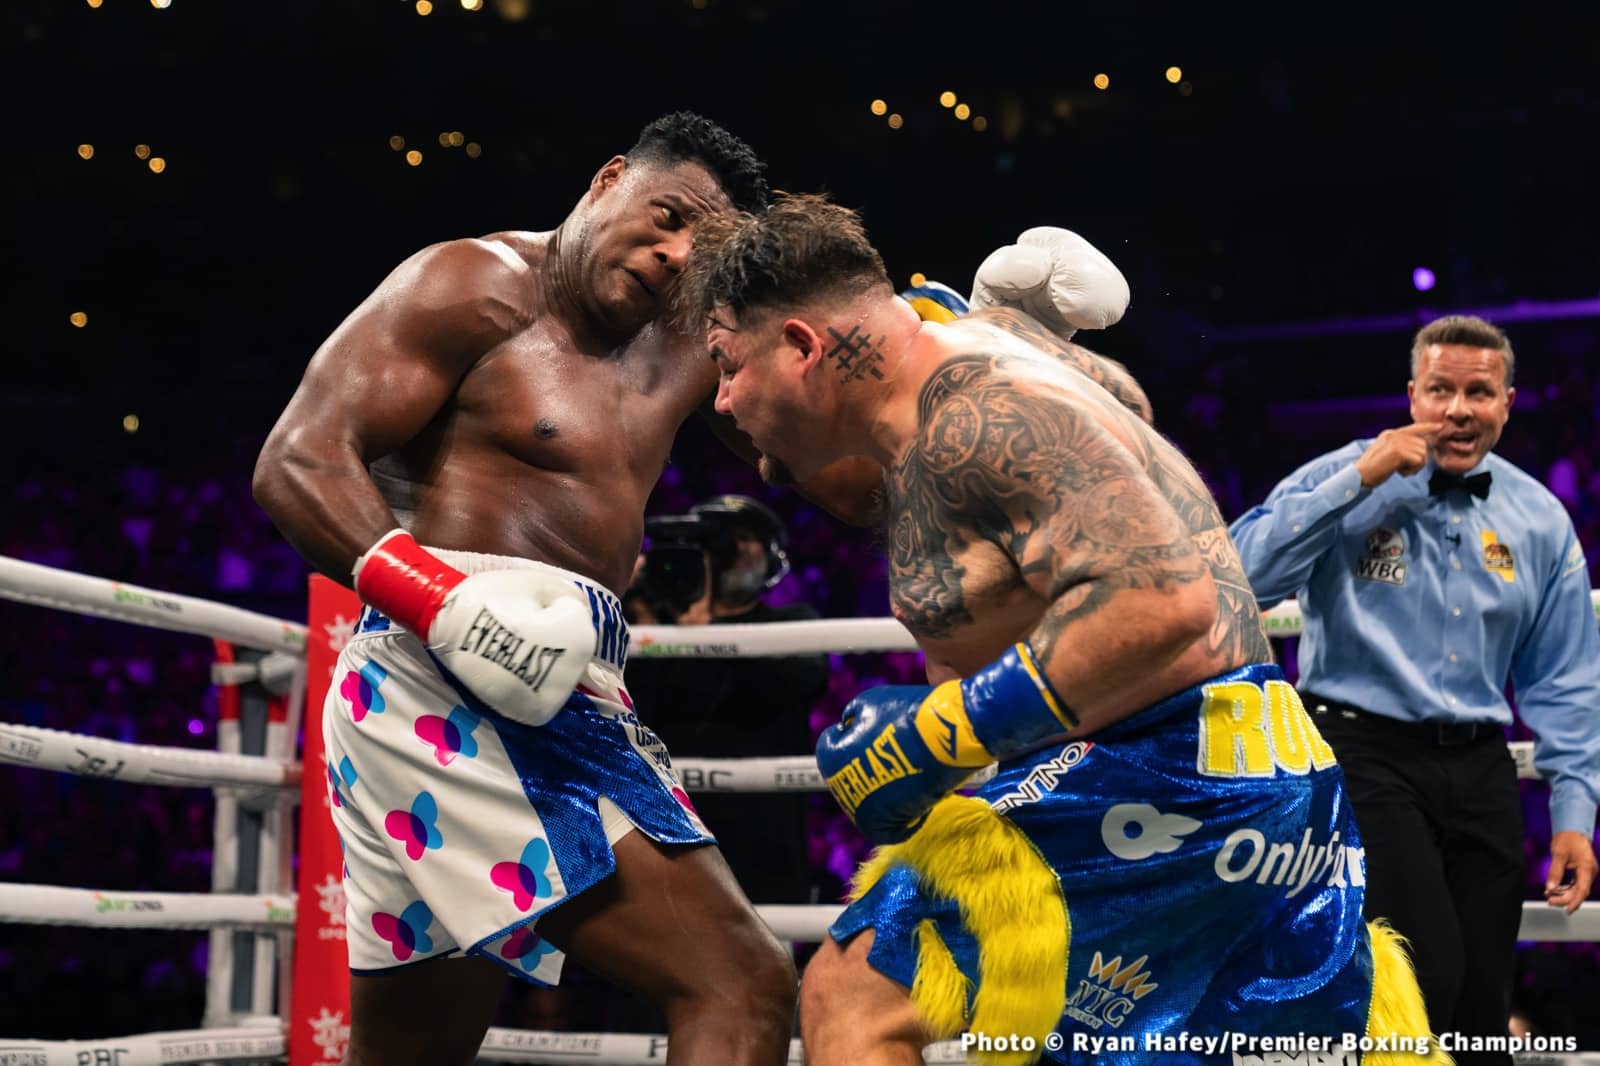 Andy Ruiz Jr defeats Luis Ortiz by 12 round decision - Boxing Results